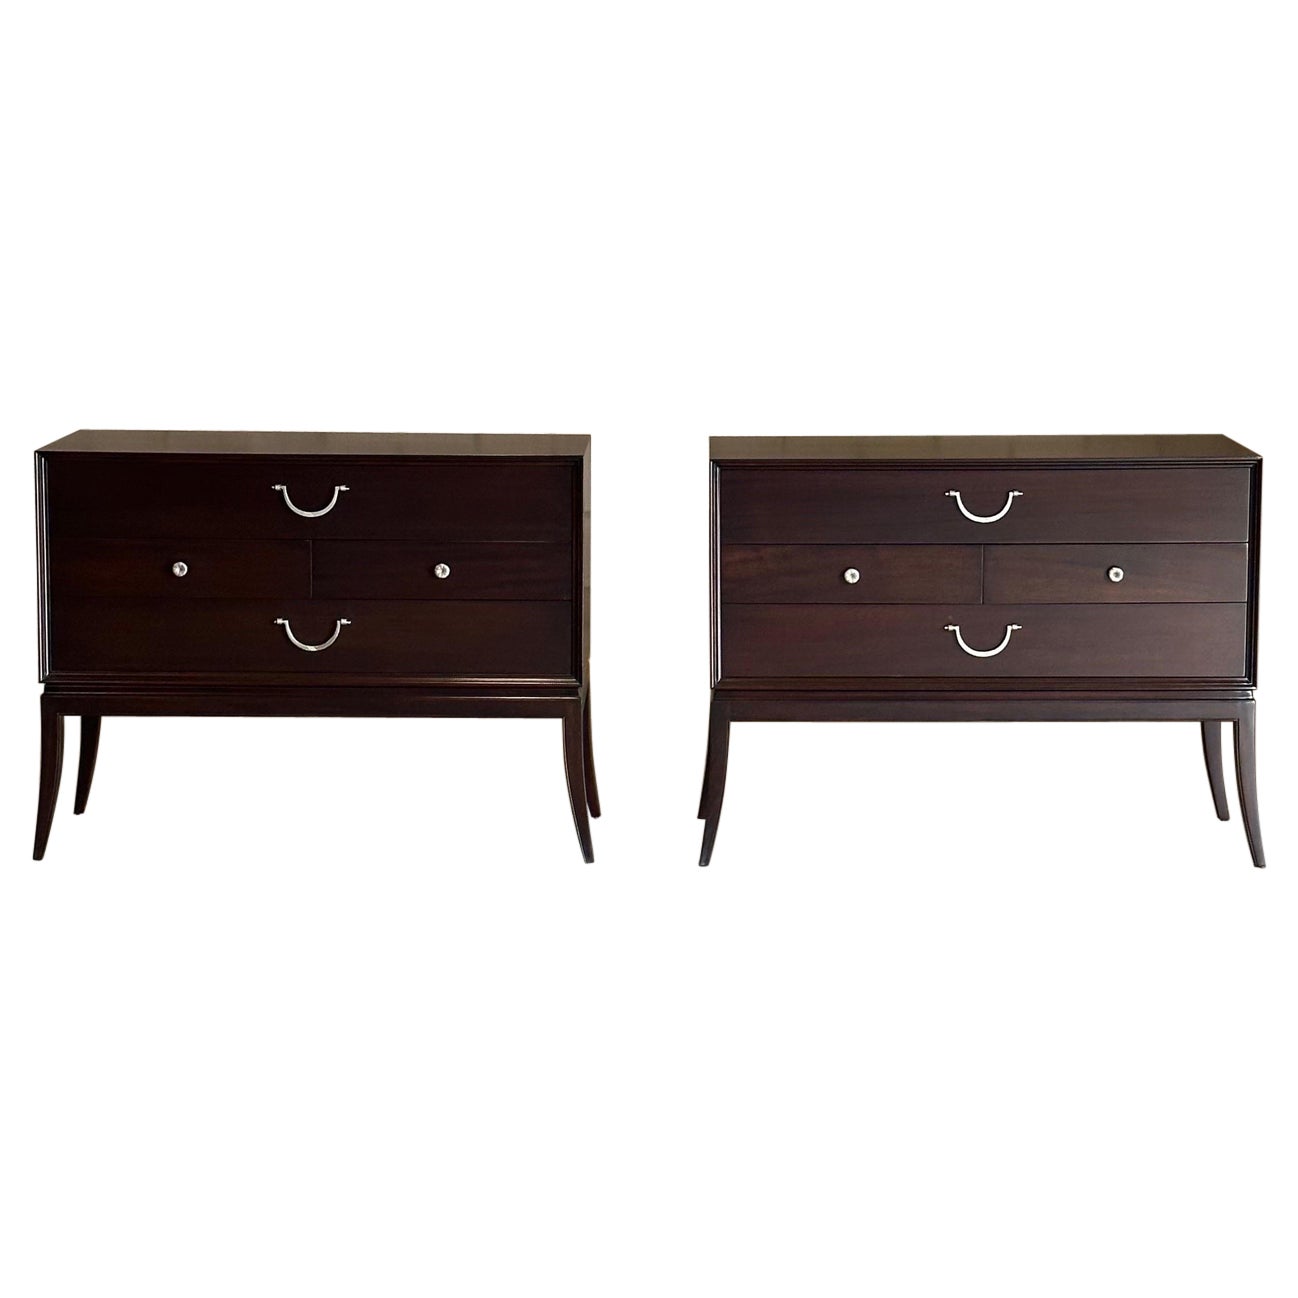 Tommi Parzinger Chests for Charak Modern- A Pair For Sale